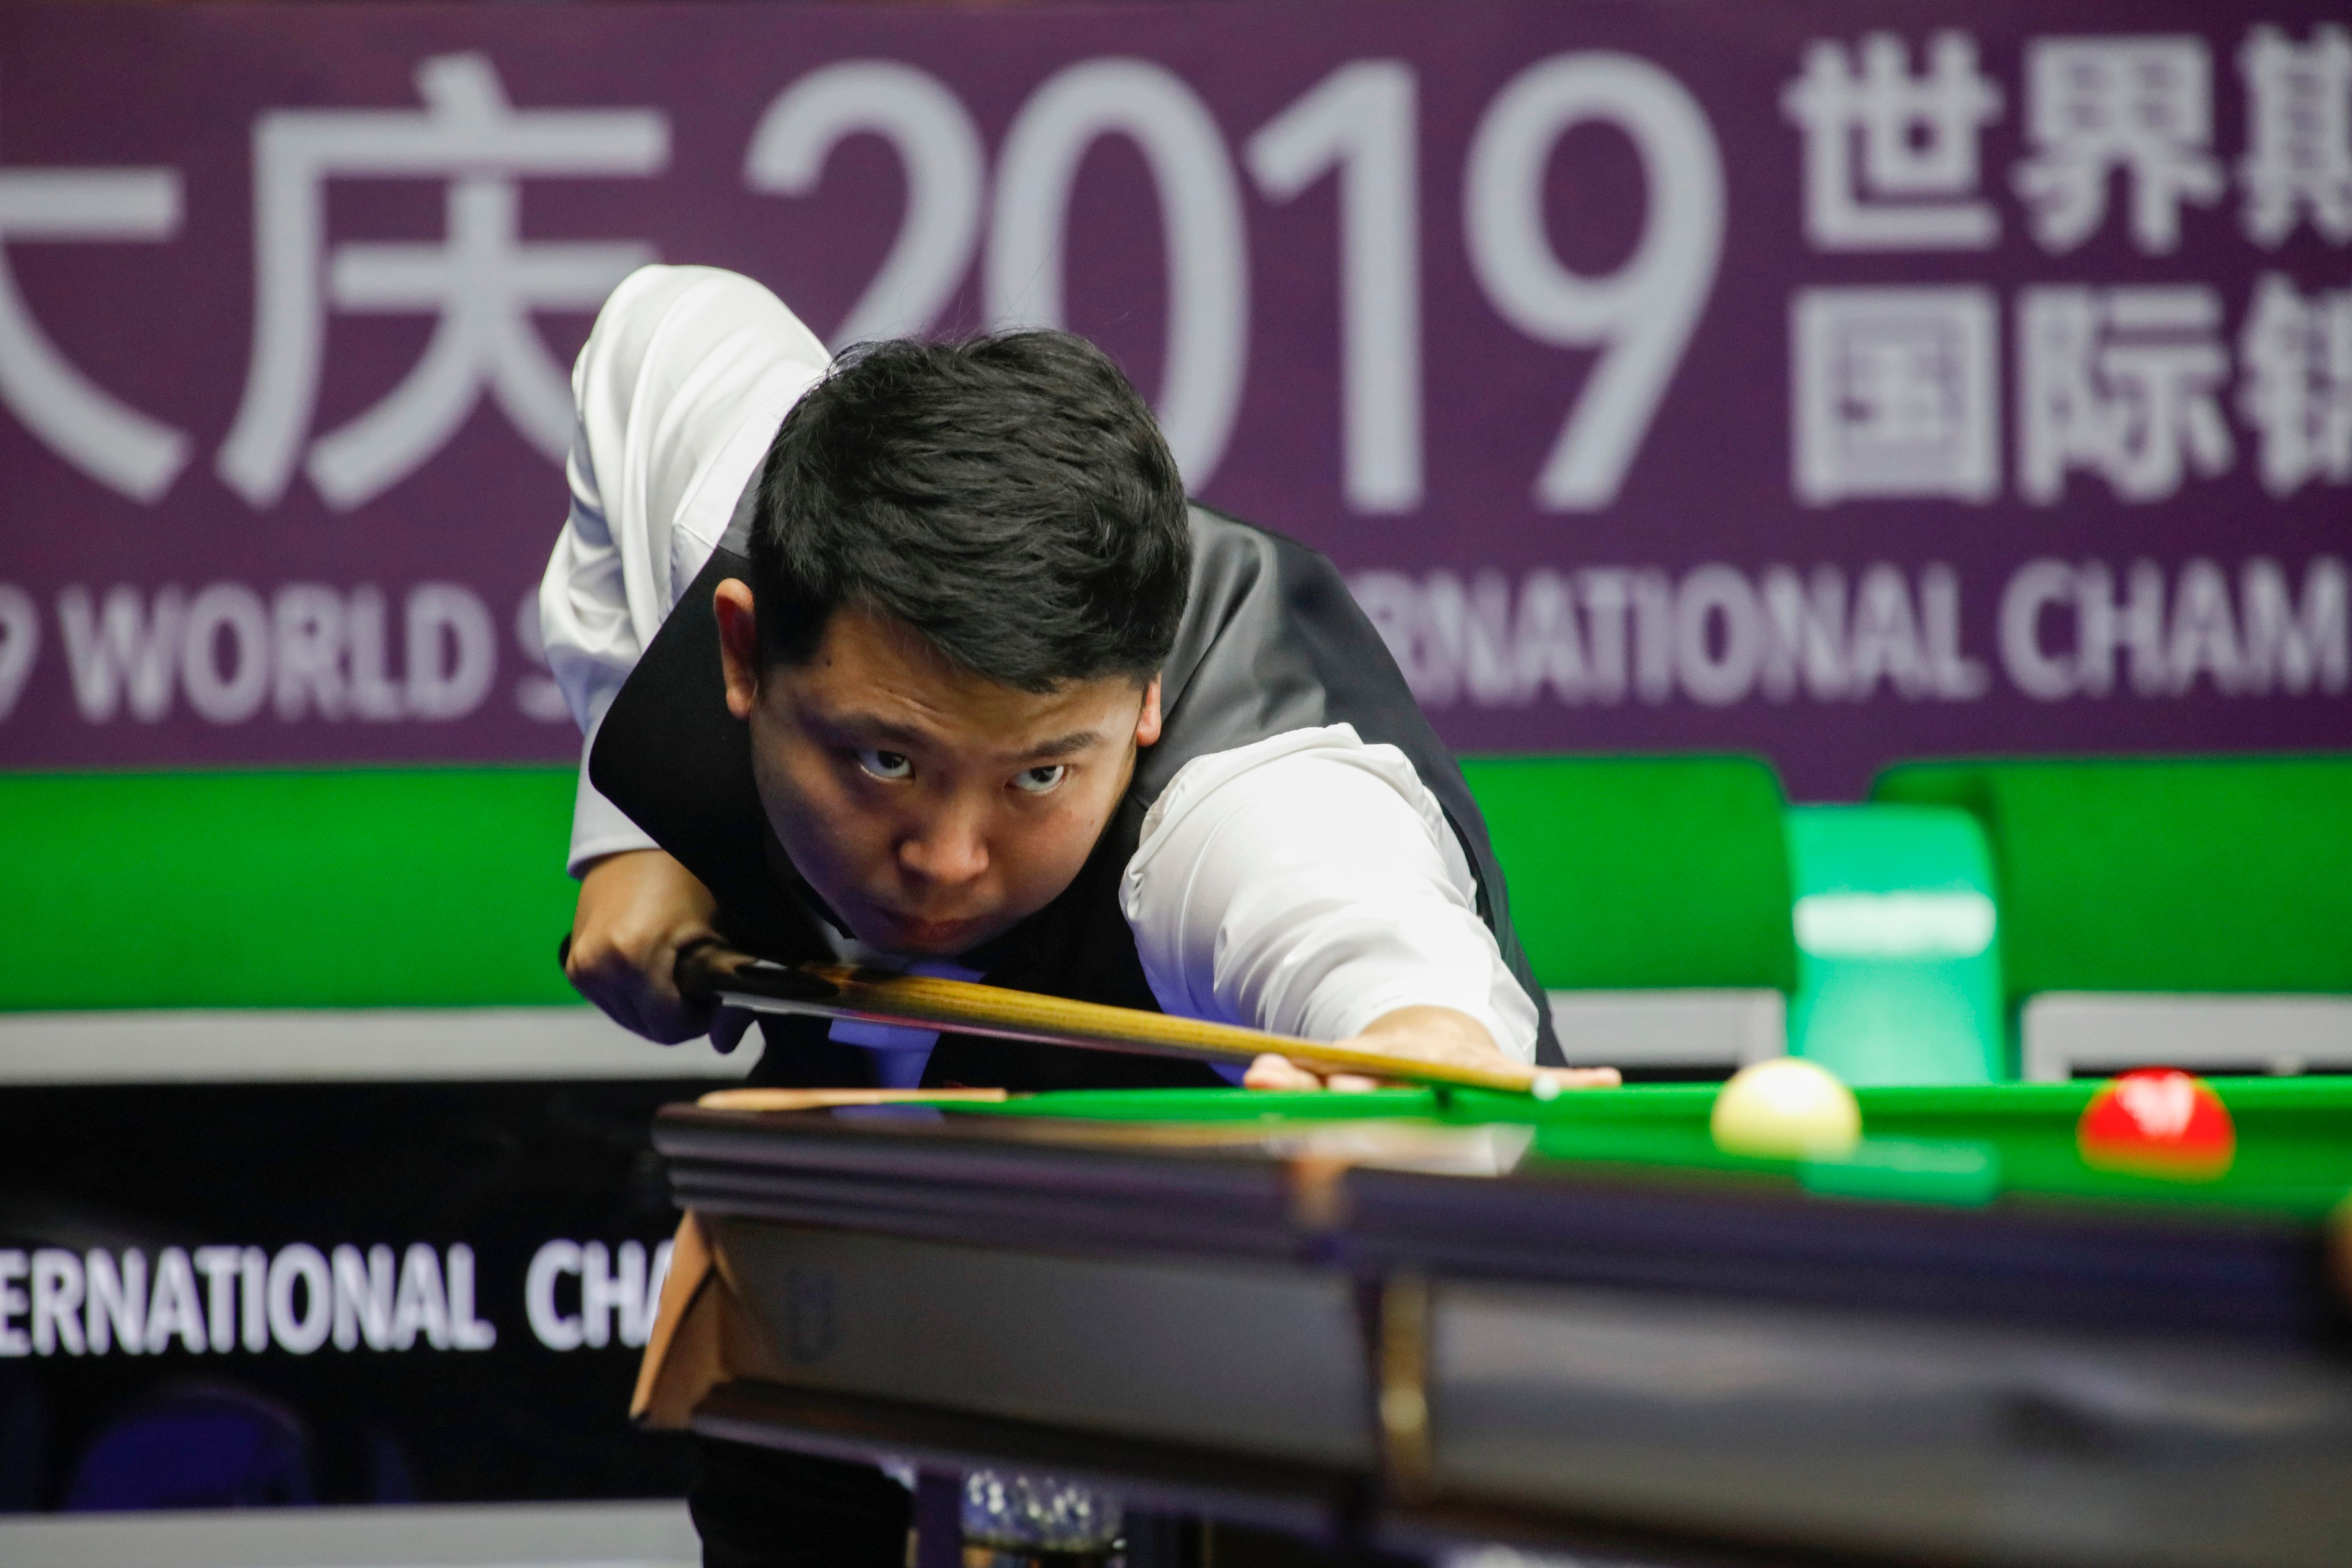 Zhang Anda is one of several Chinese players vieing for places in the tournament proper. Photo: CNS